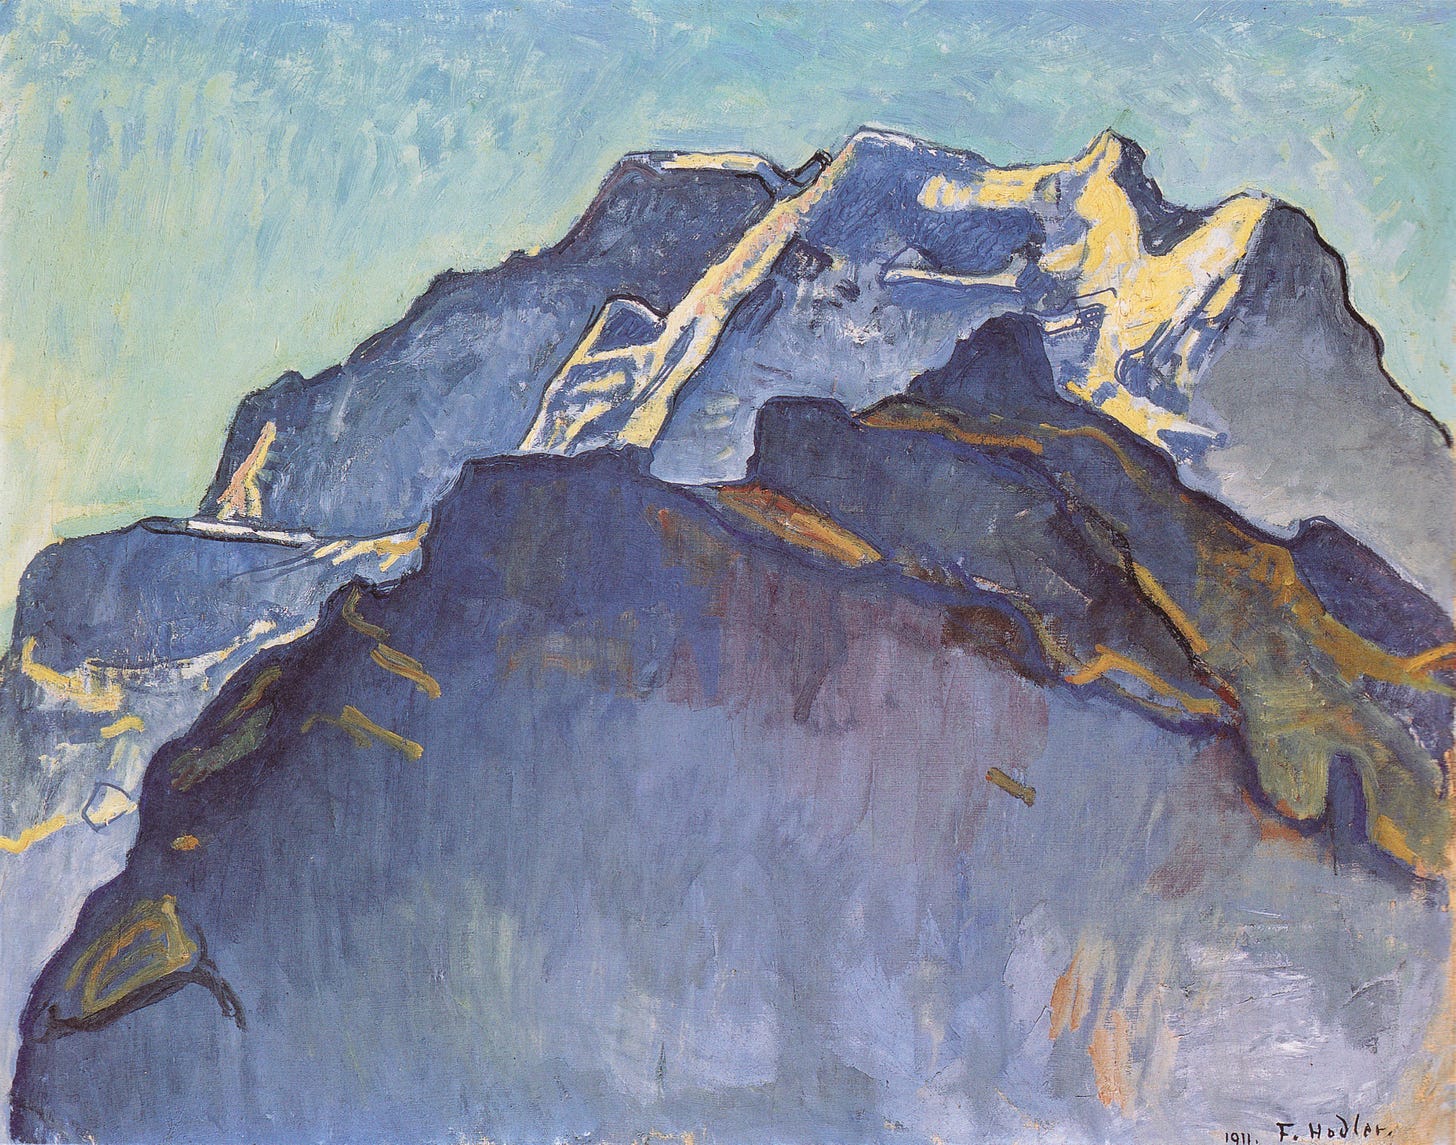 A series of craggy mountains in slate blues are topped and edged with gold: snow in sunlight. The sky behind is the color of cornflowers. 